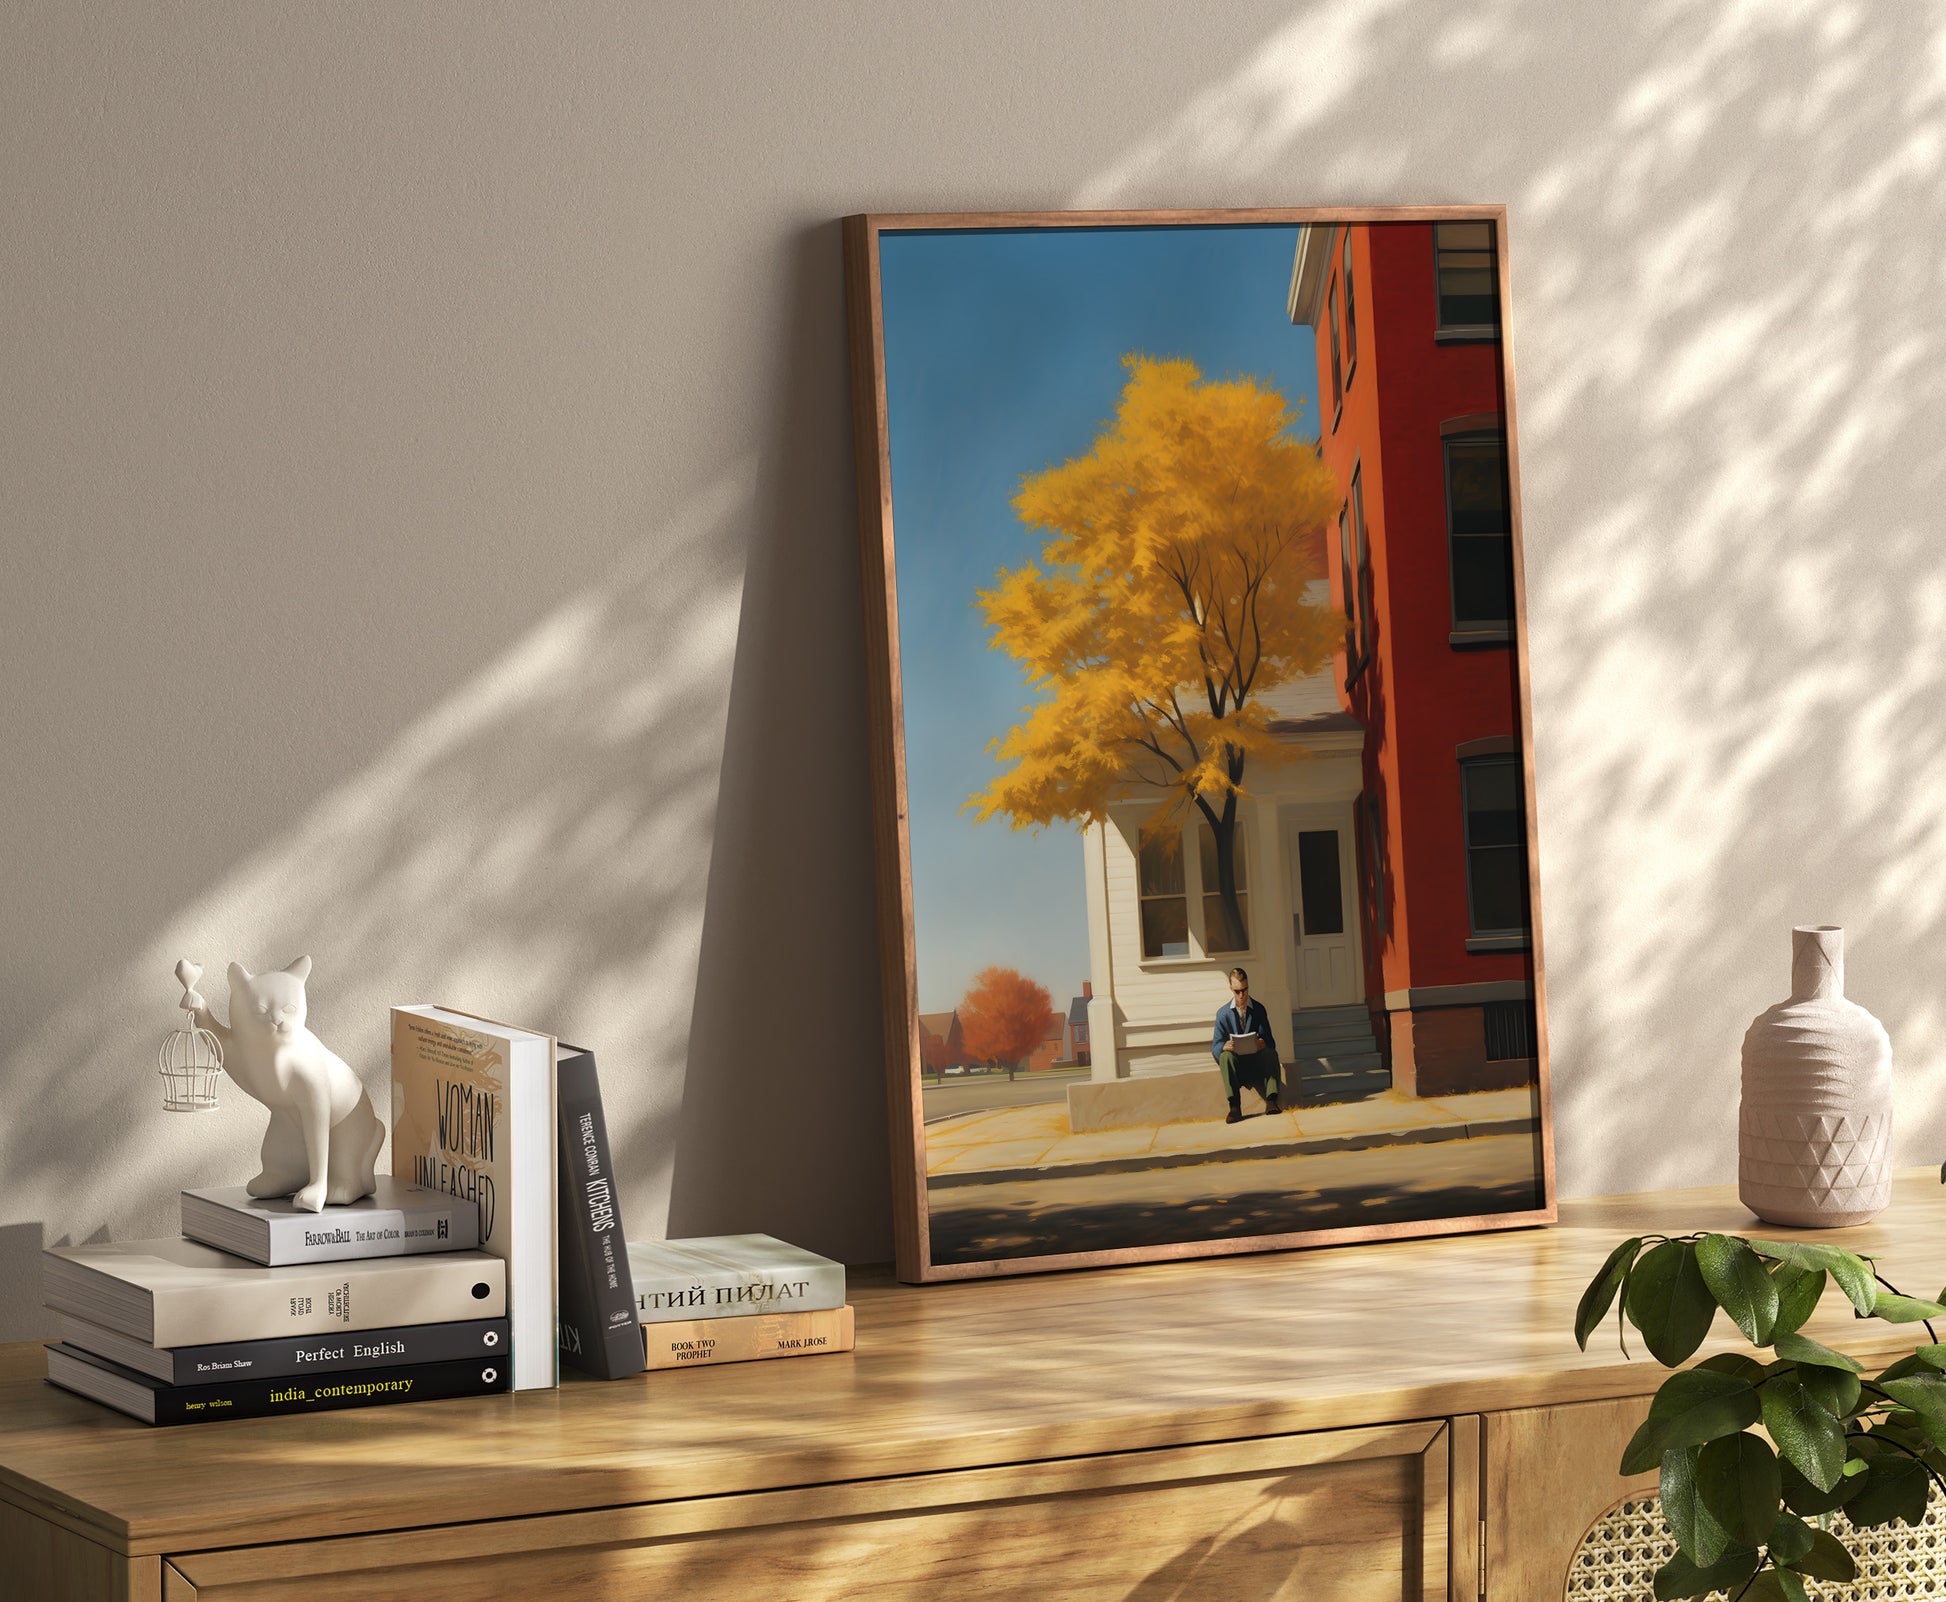 A framed painting leaning against a wall, depicting a person sitting by a tree with autumn leaves.